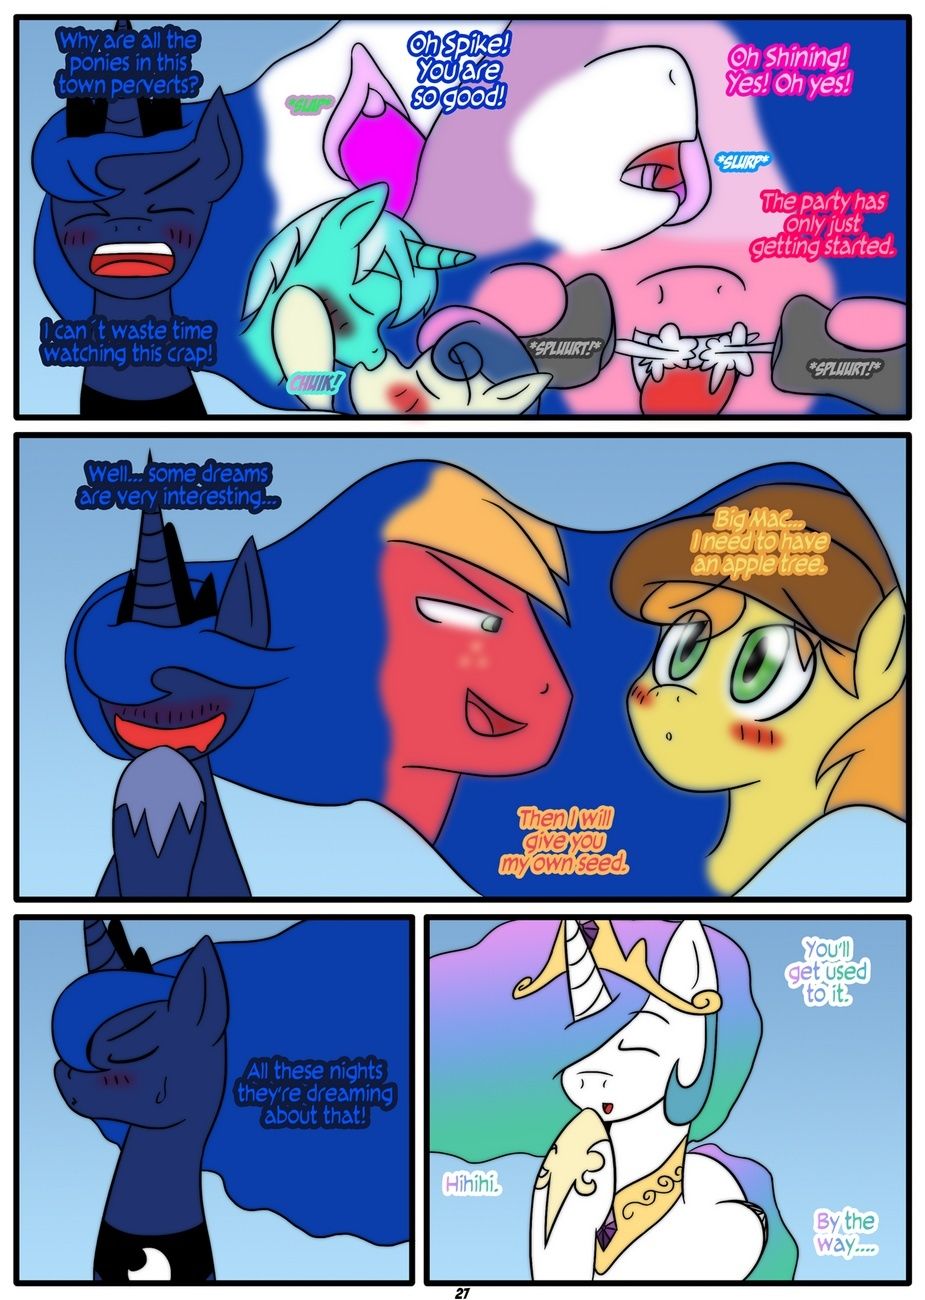 Octavia 3.5 - Royal Duel - 1ste Round page 3